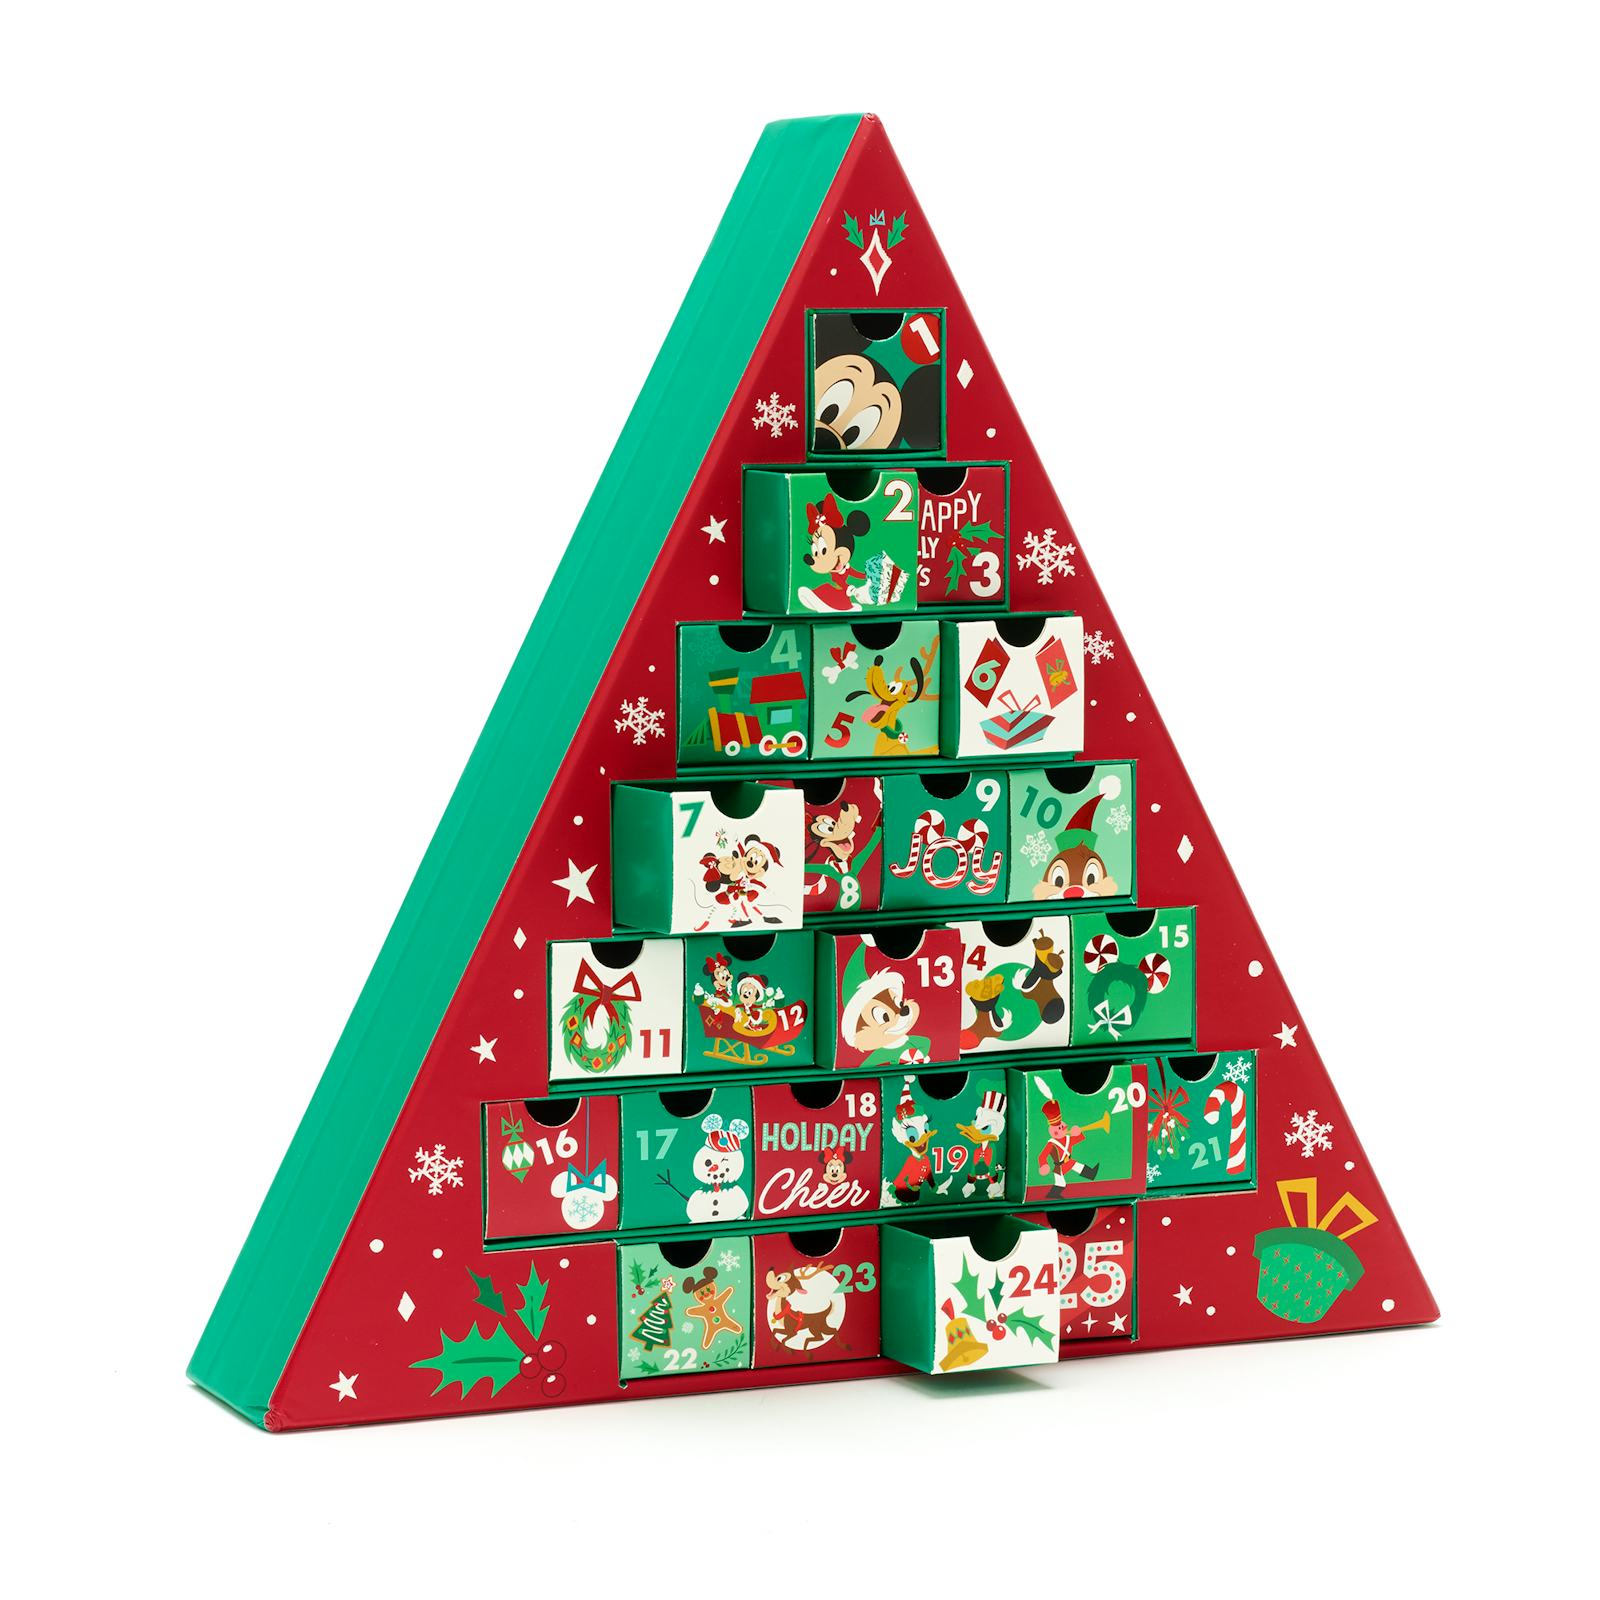 Disney Has Launched Advent Calendars And Our Childhood Dreams Have Come